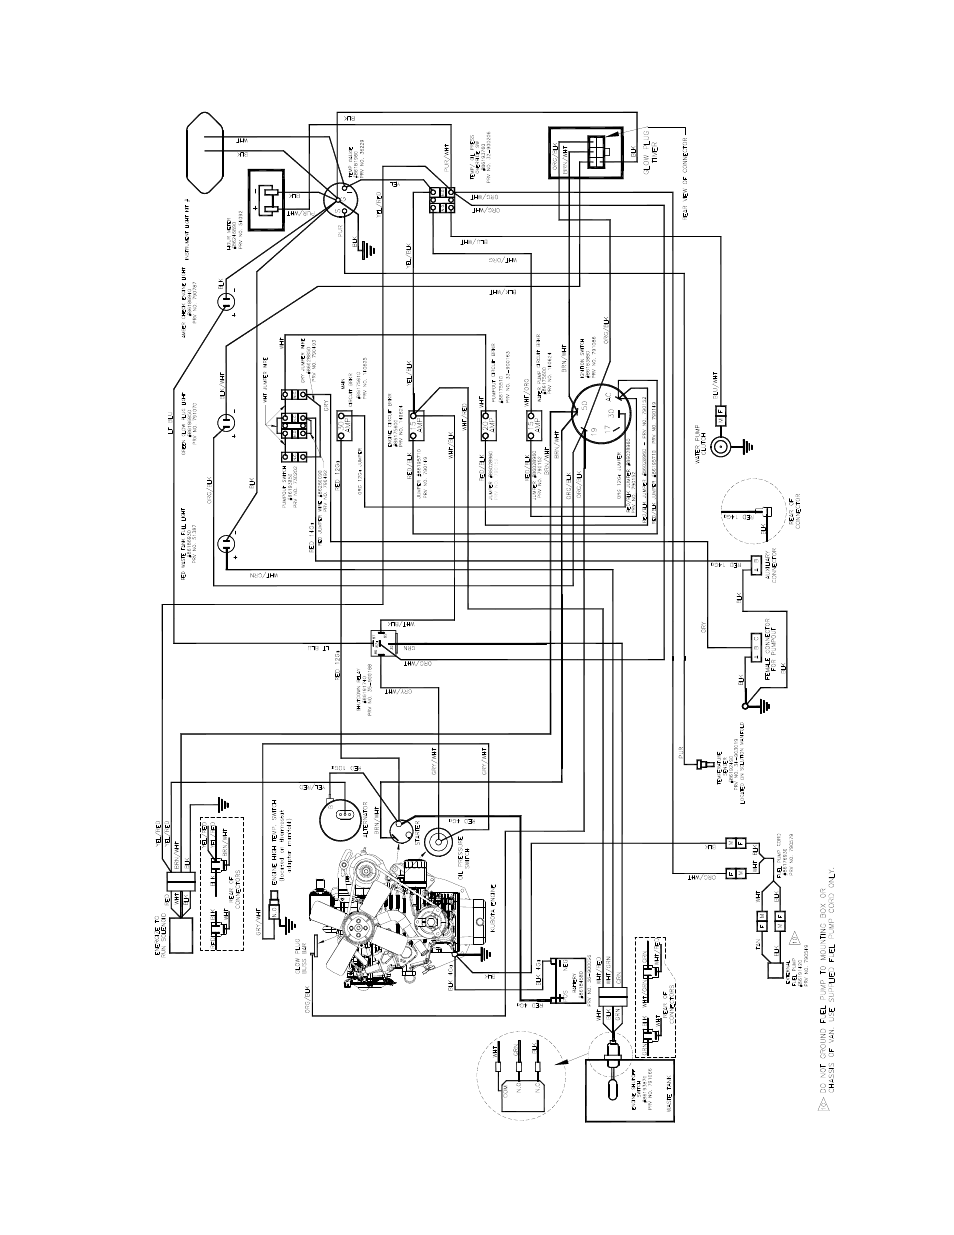 86037630 Pgs 8-84and 8-85  Wiring Diagram